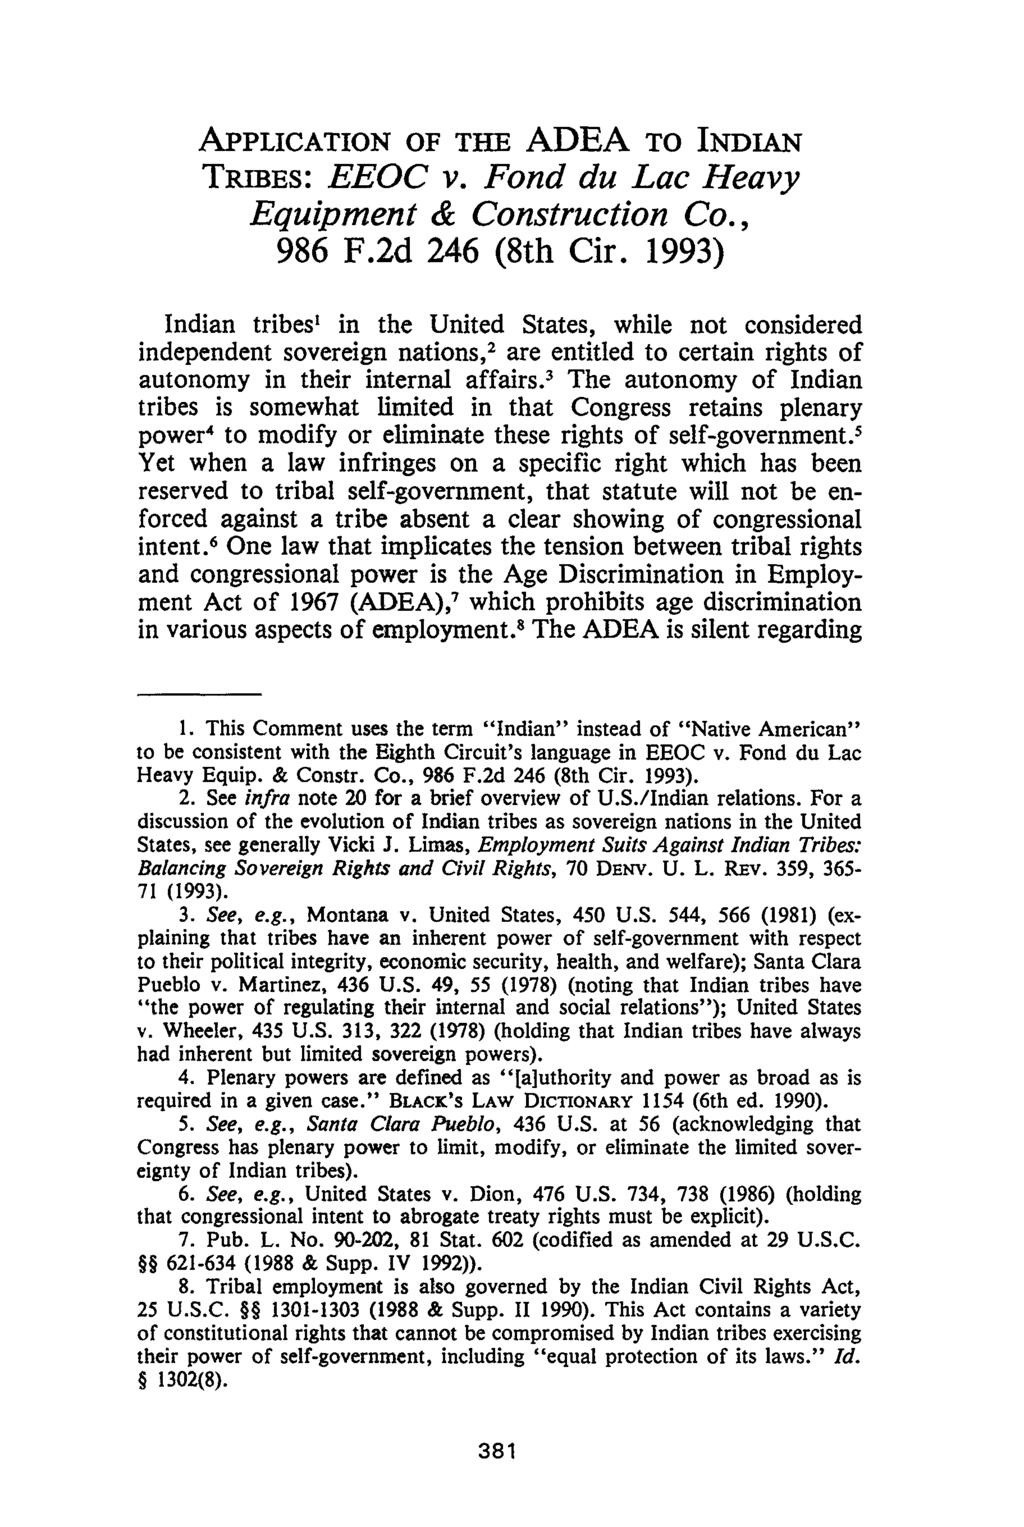 APPLICATION OF THE ADEA TO INDIAN TRIBES: EEOC v. Fond du Lac Heavy Equipment & Construction Co., 986 F.2d 246 (8th Cir.